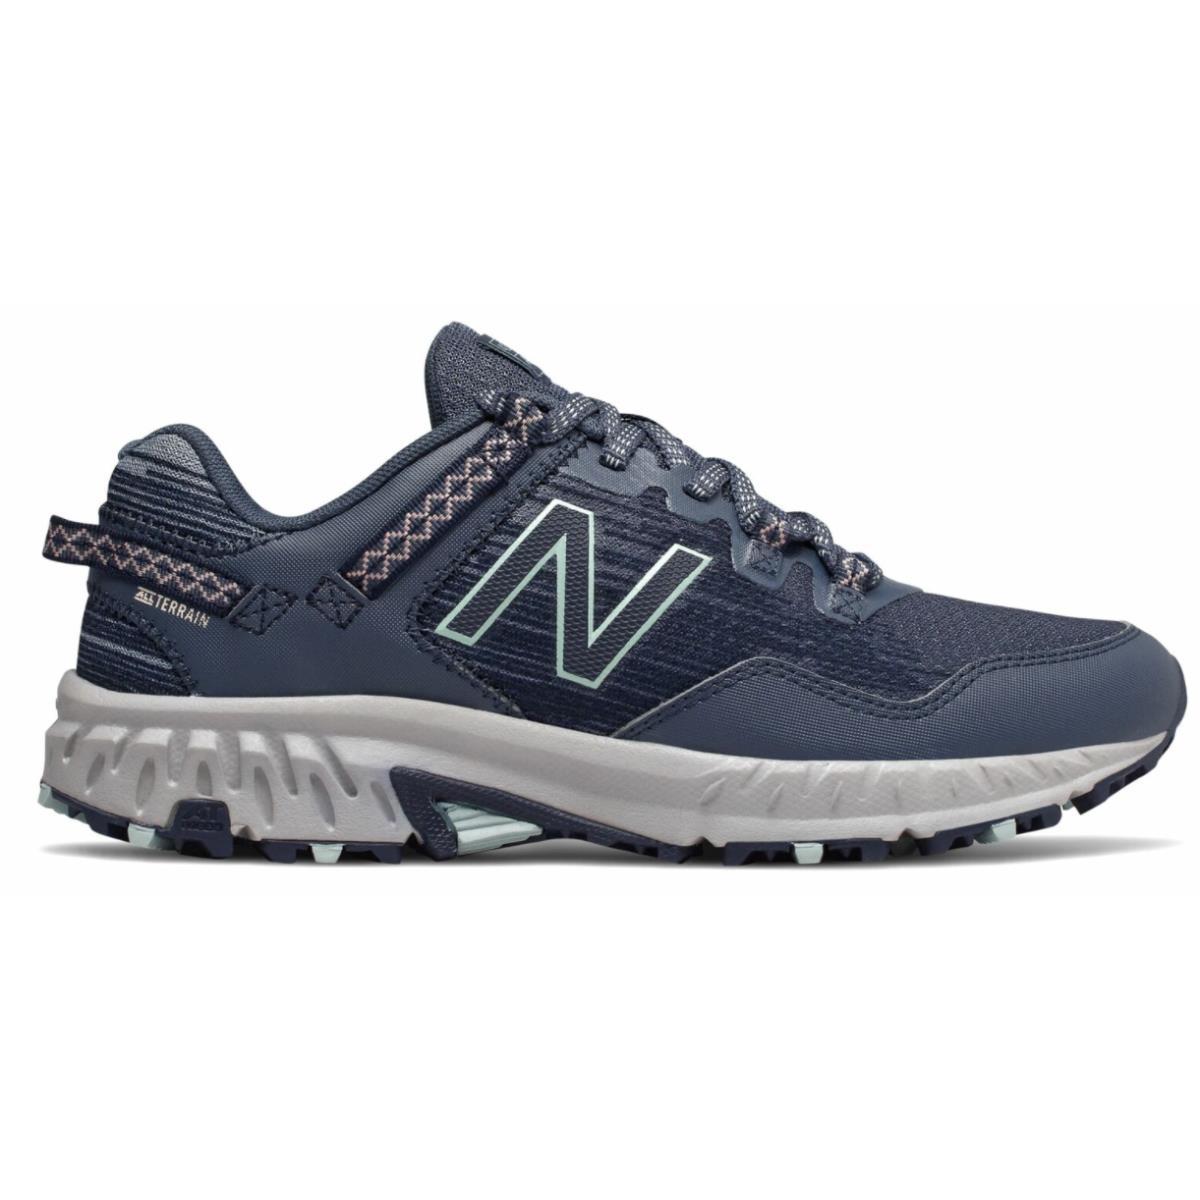 New Balance Womens Size 5 Navy 410v6 Trail Shoes N1887